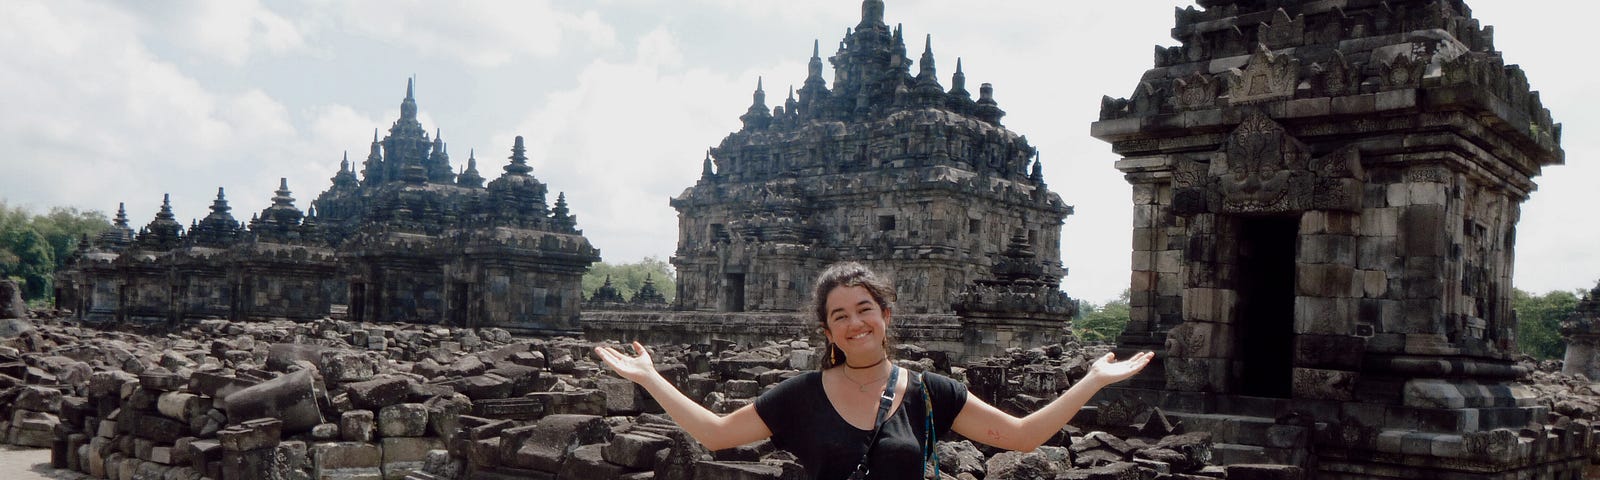 a woman (me) smiling and making the “I don’t know” gesture in front of a temple in Java, Indonesia